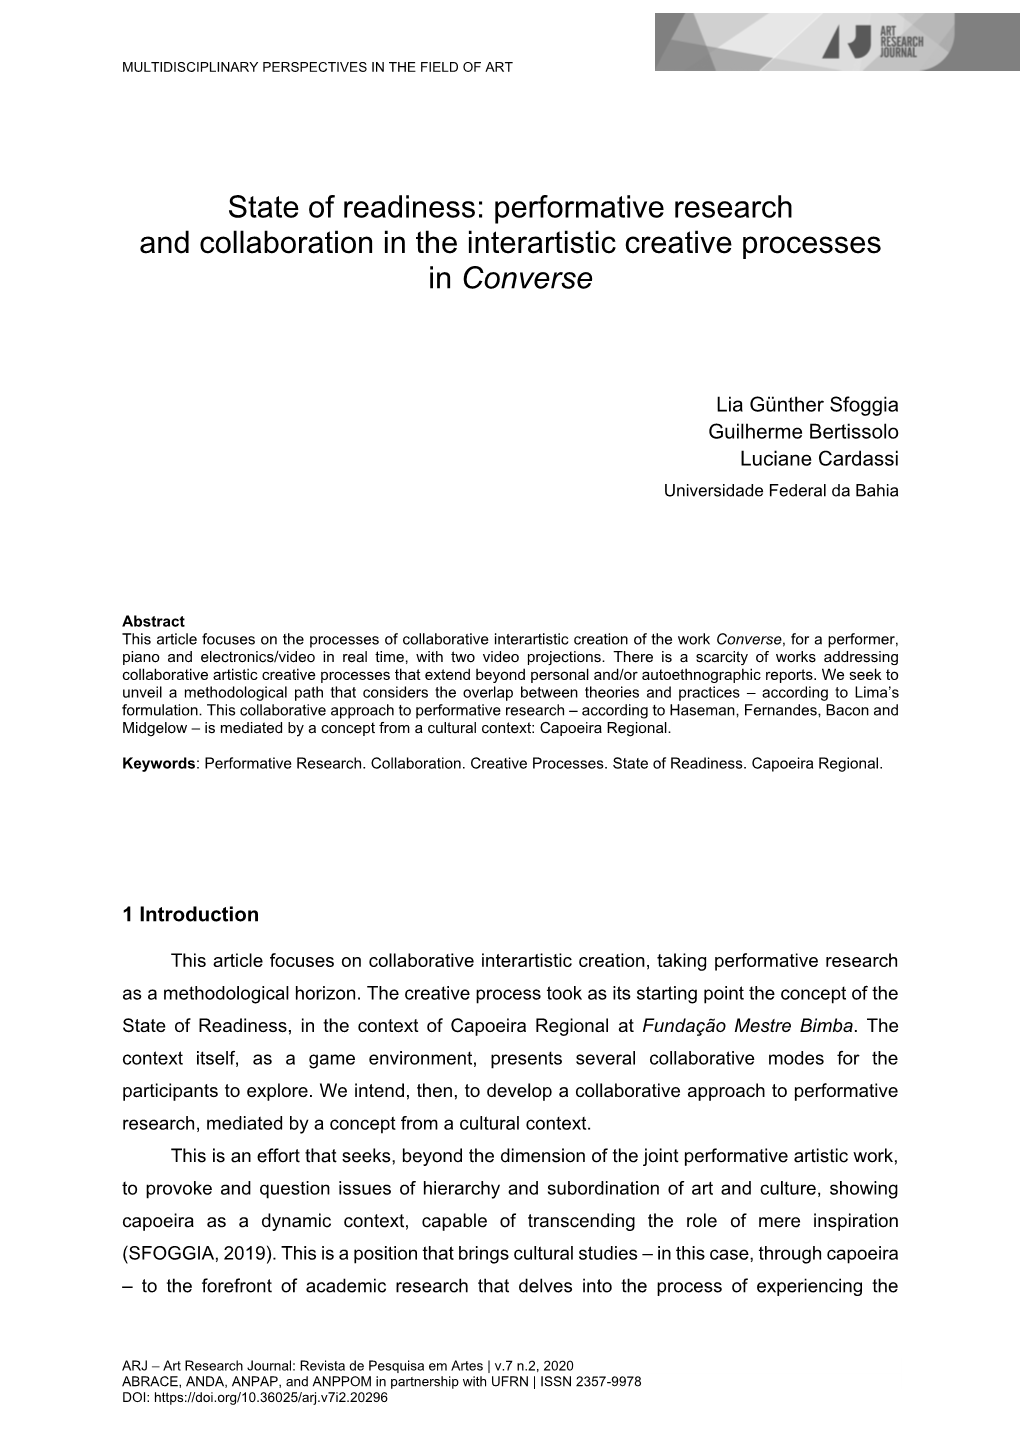 Performative Research and Collaboration in the Interartistic Creative Processes in Converse